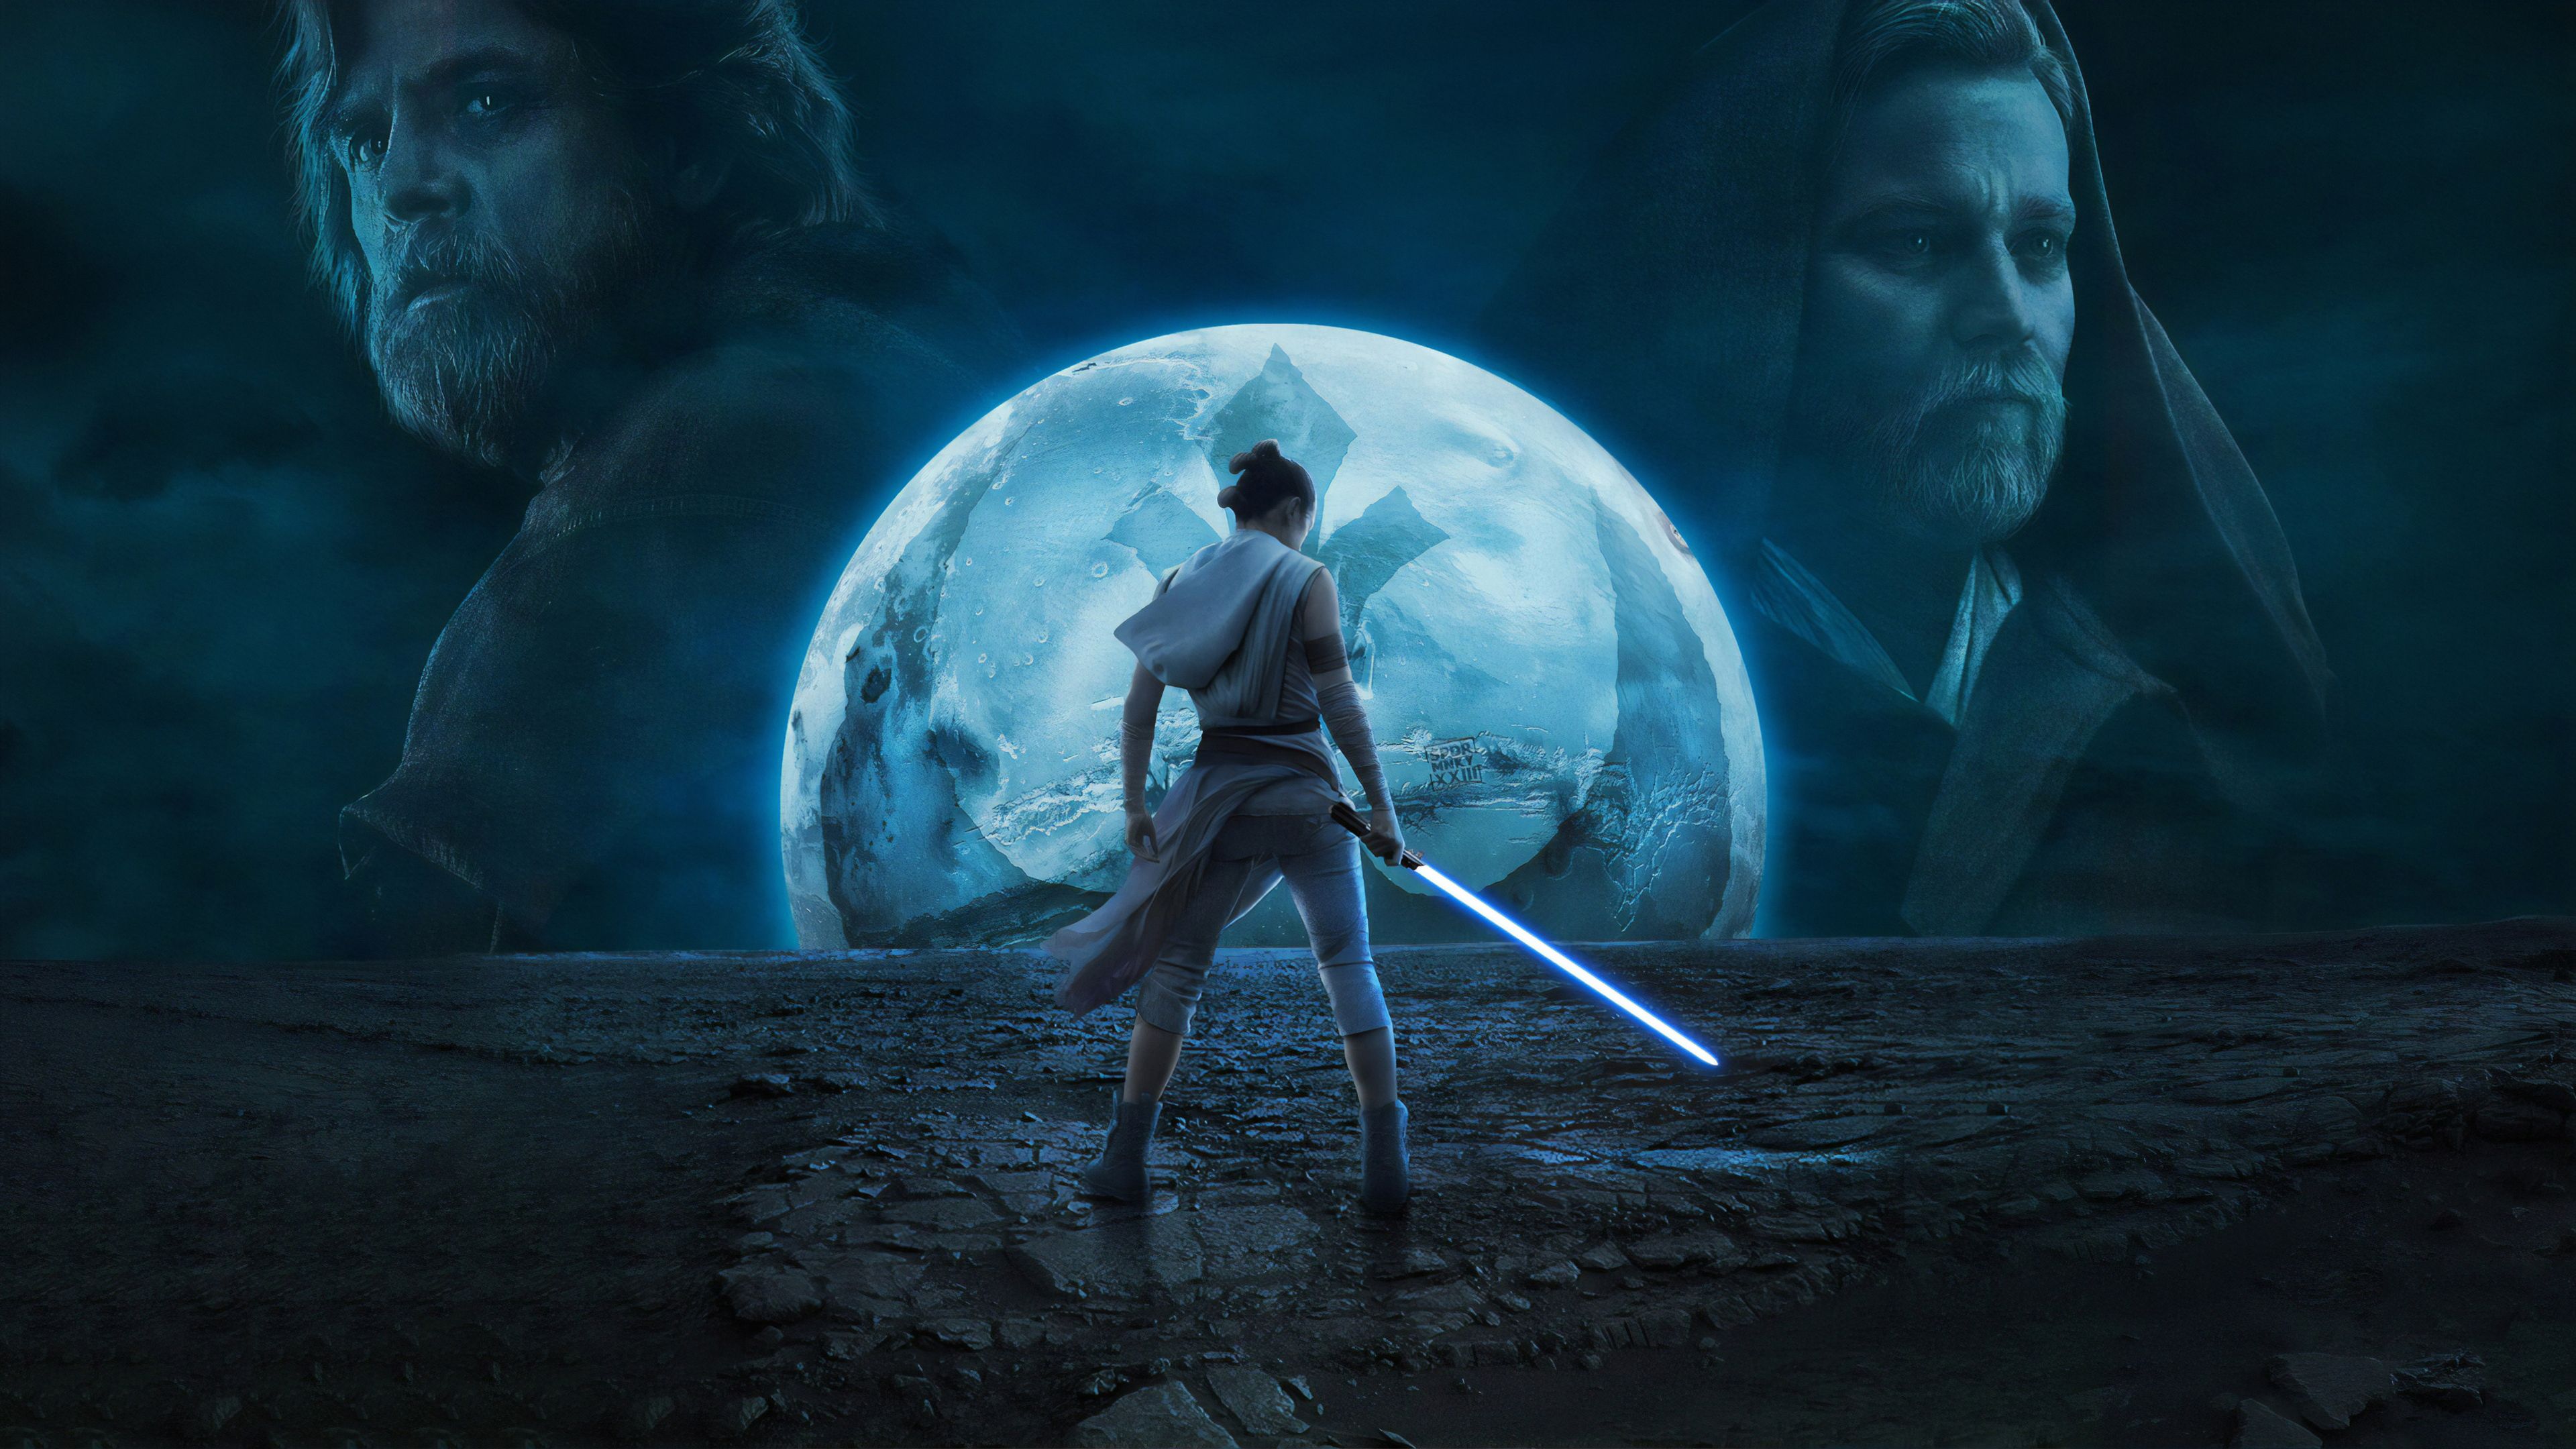 Star Wars: The Rise of Skywalker instal the new for windows